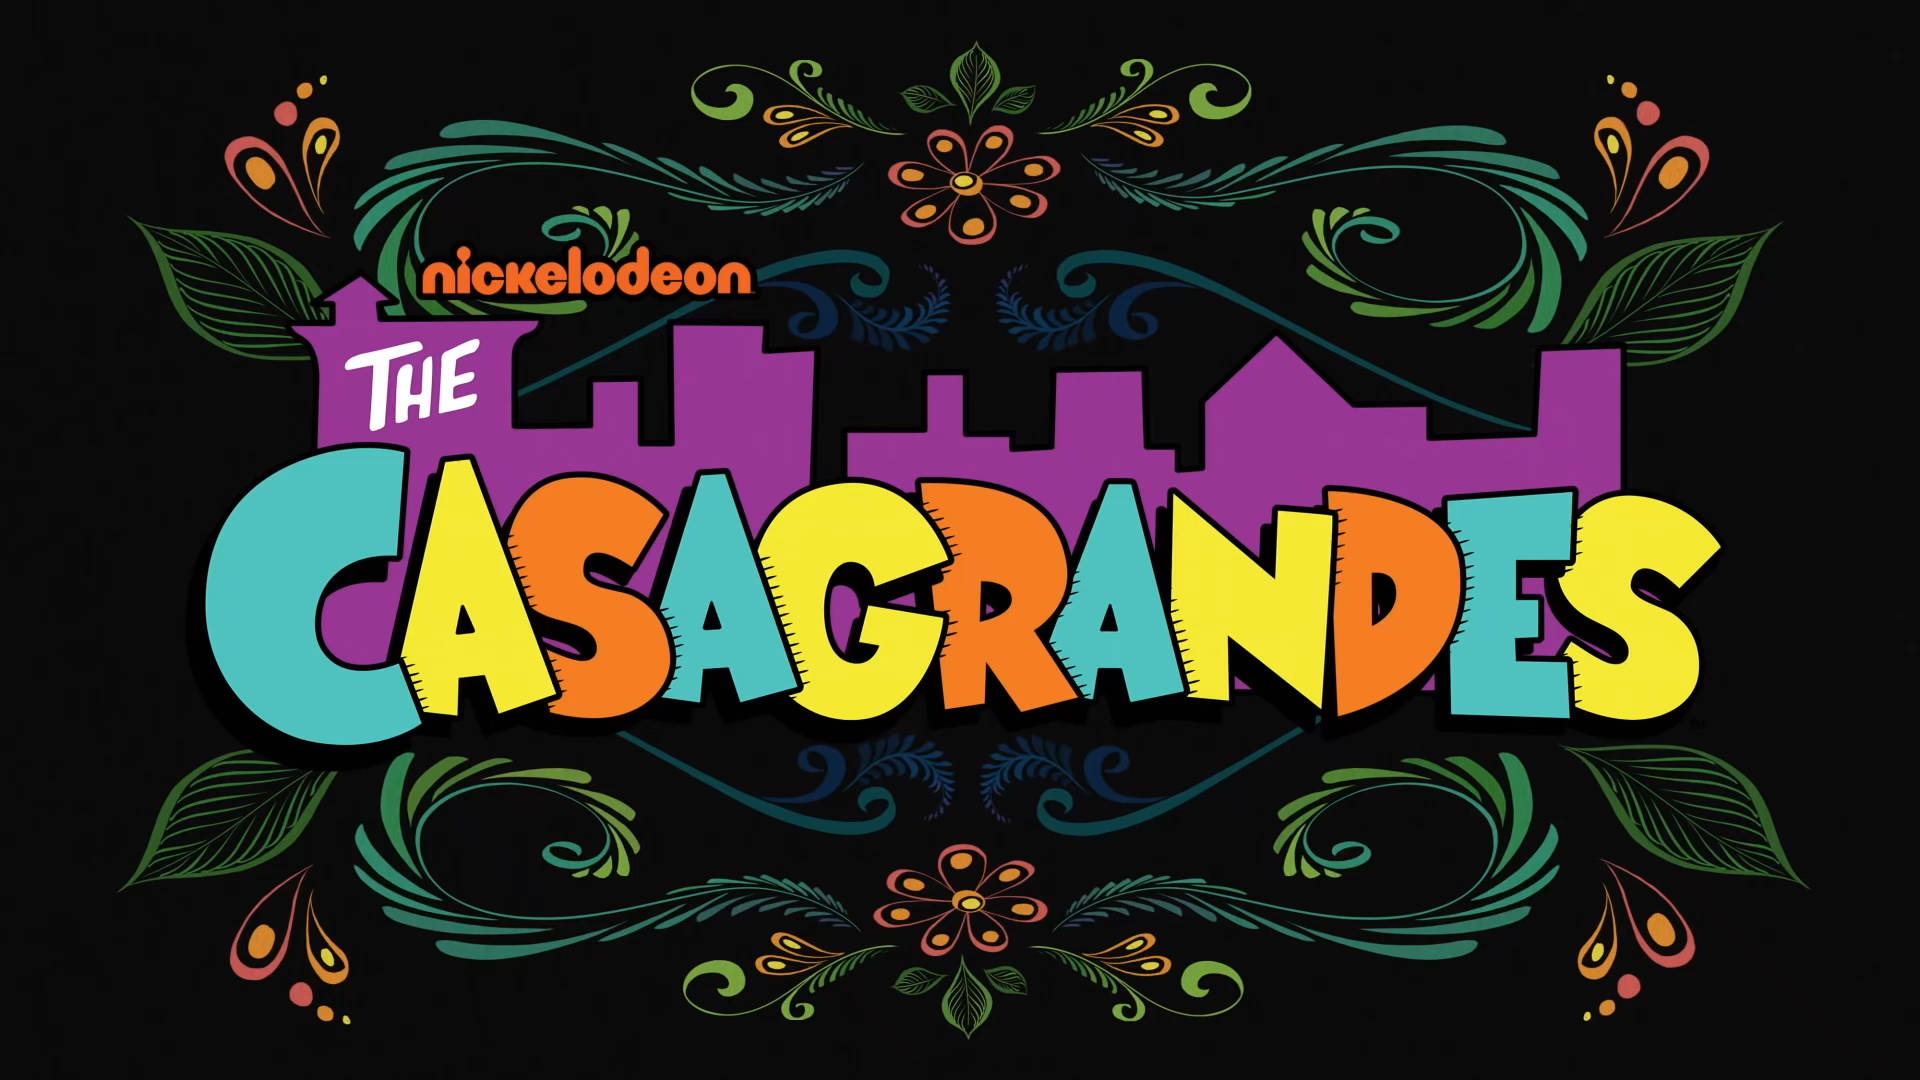 The Casagrandes Wallpapers